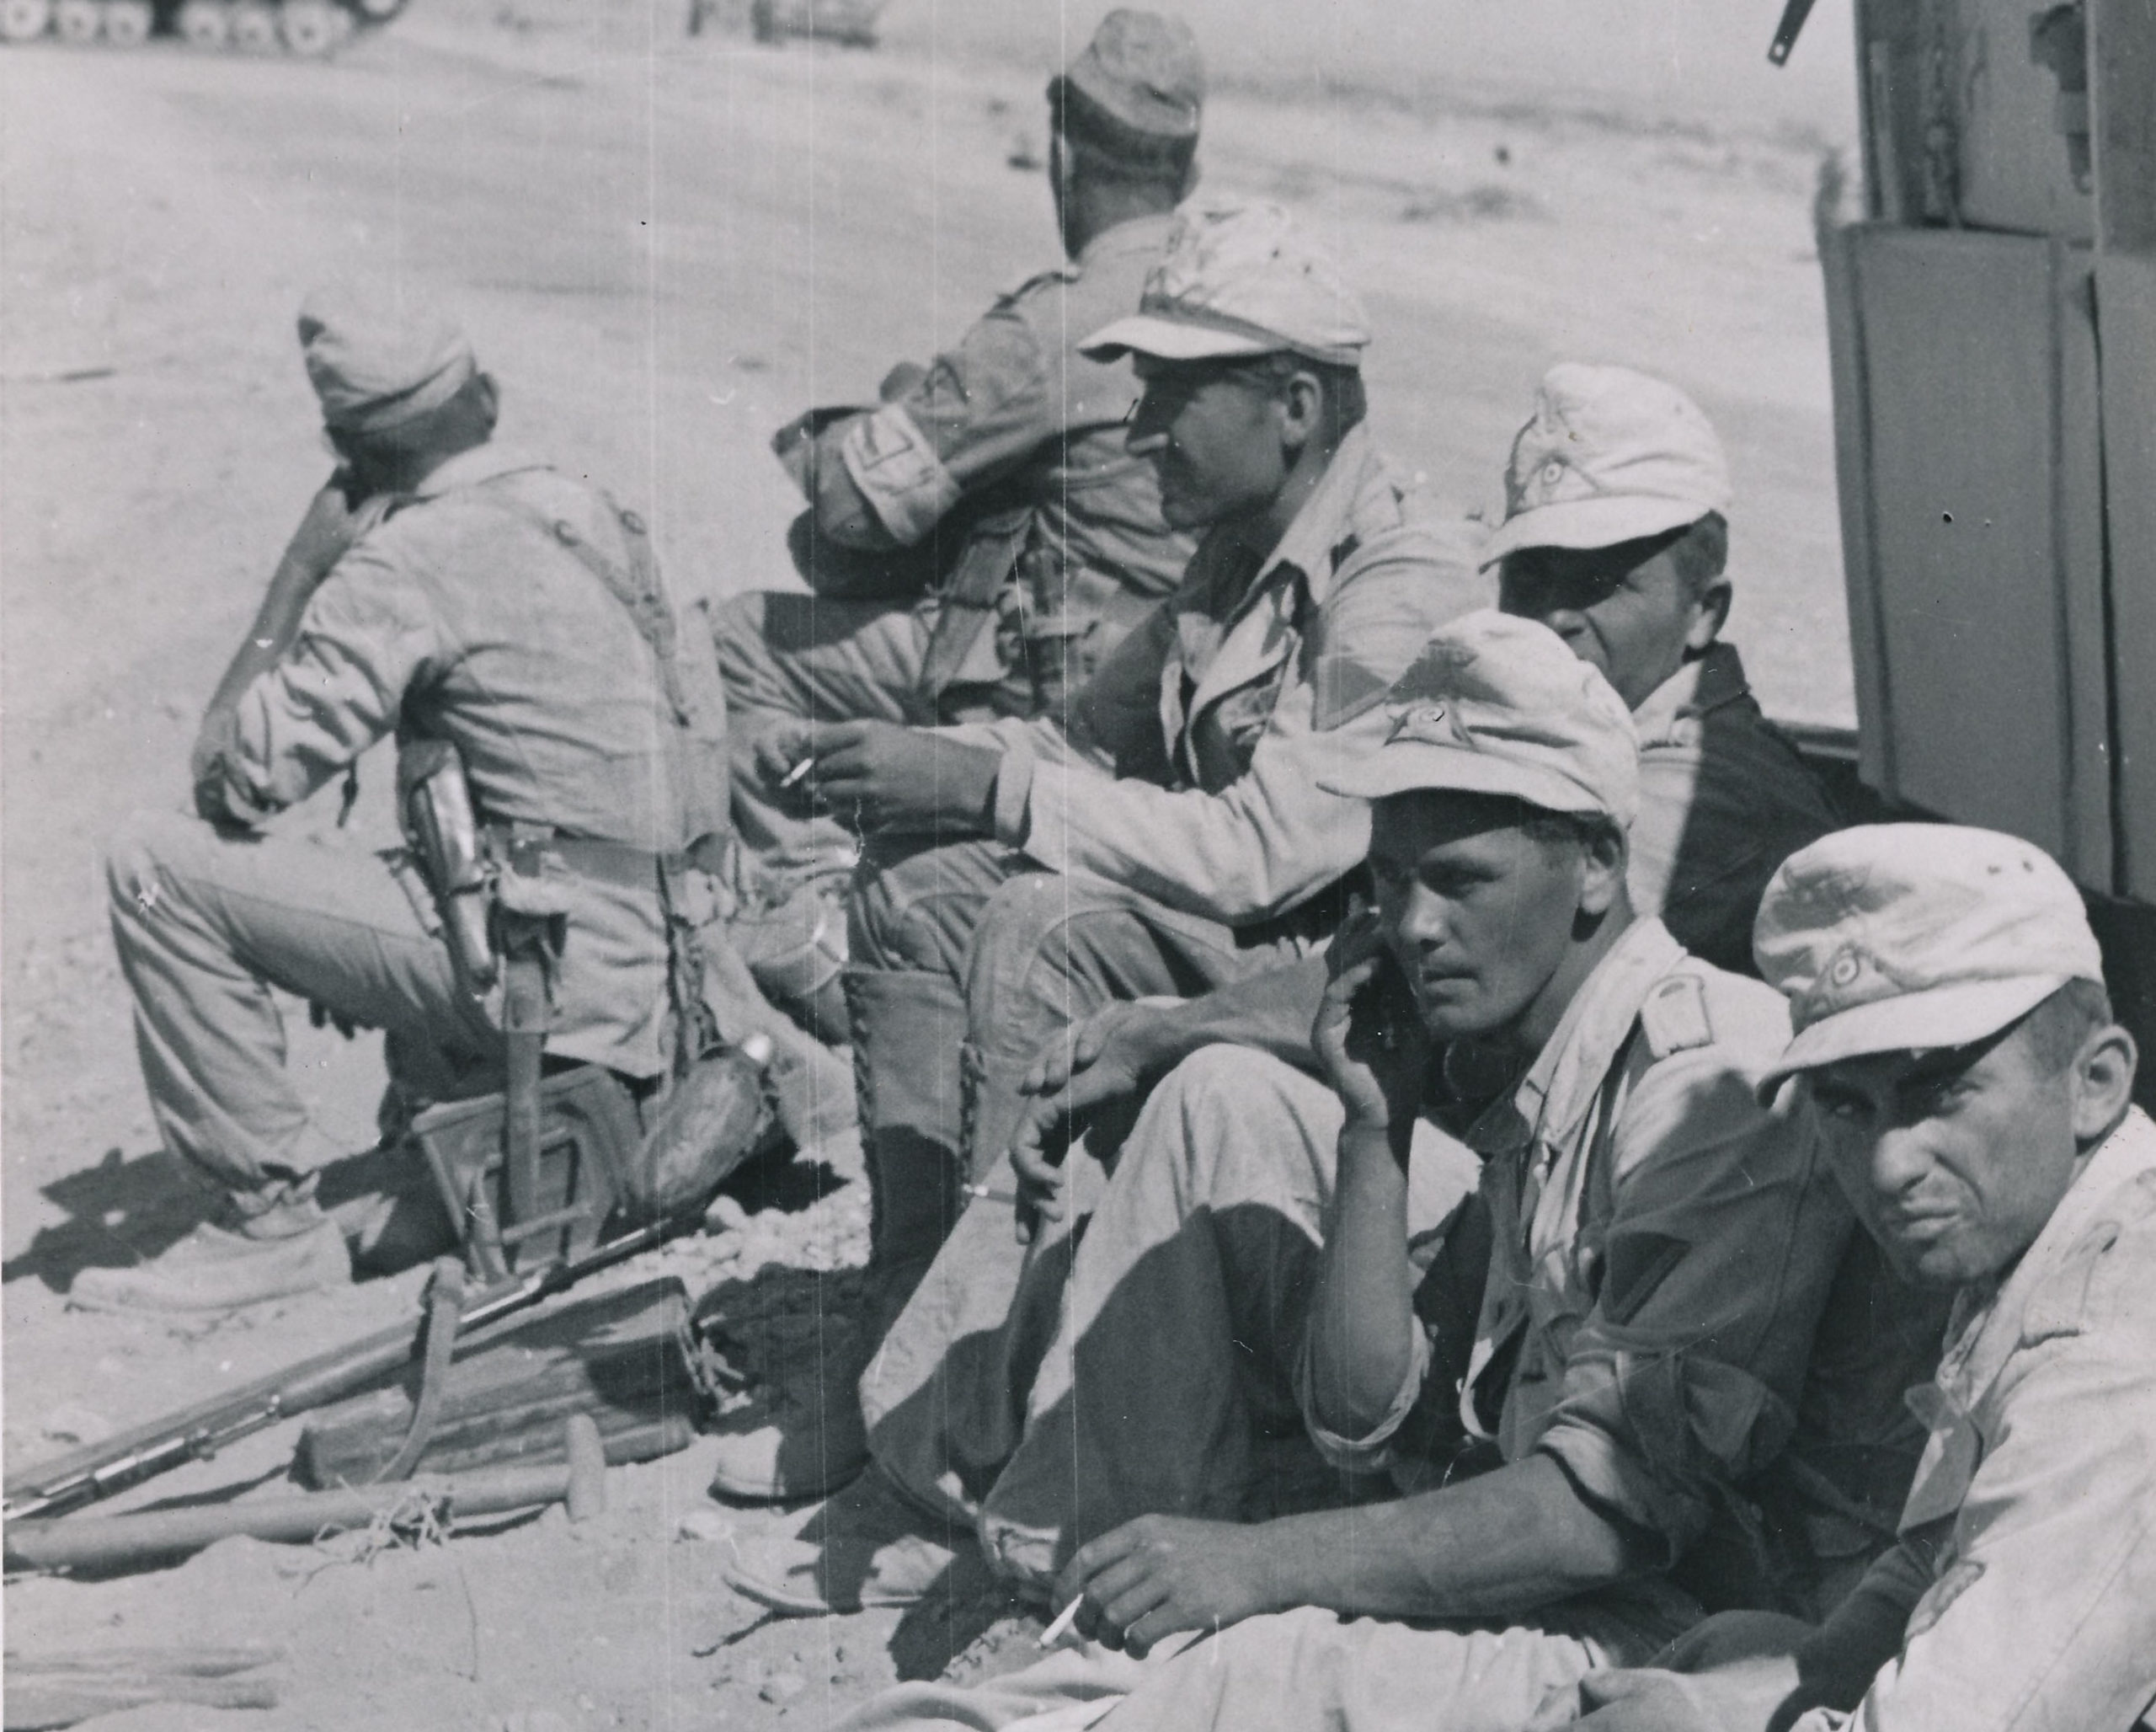 80 Years After El Alamein, German Soldiers’ Remains Discovered in Egypt